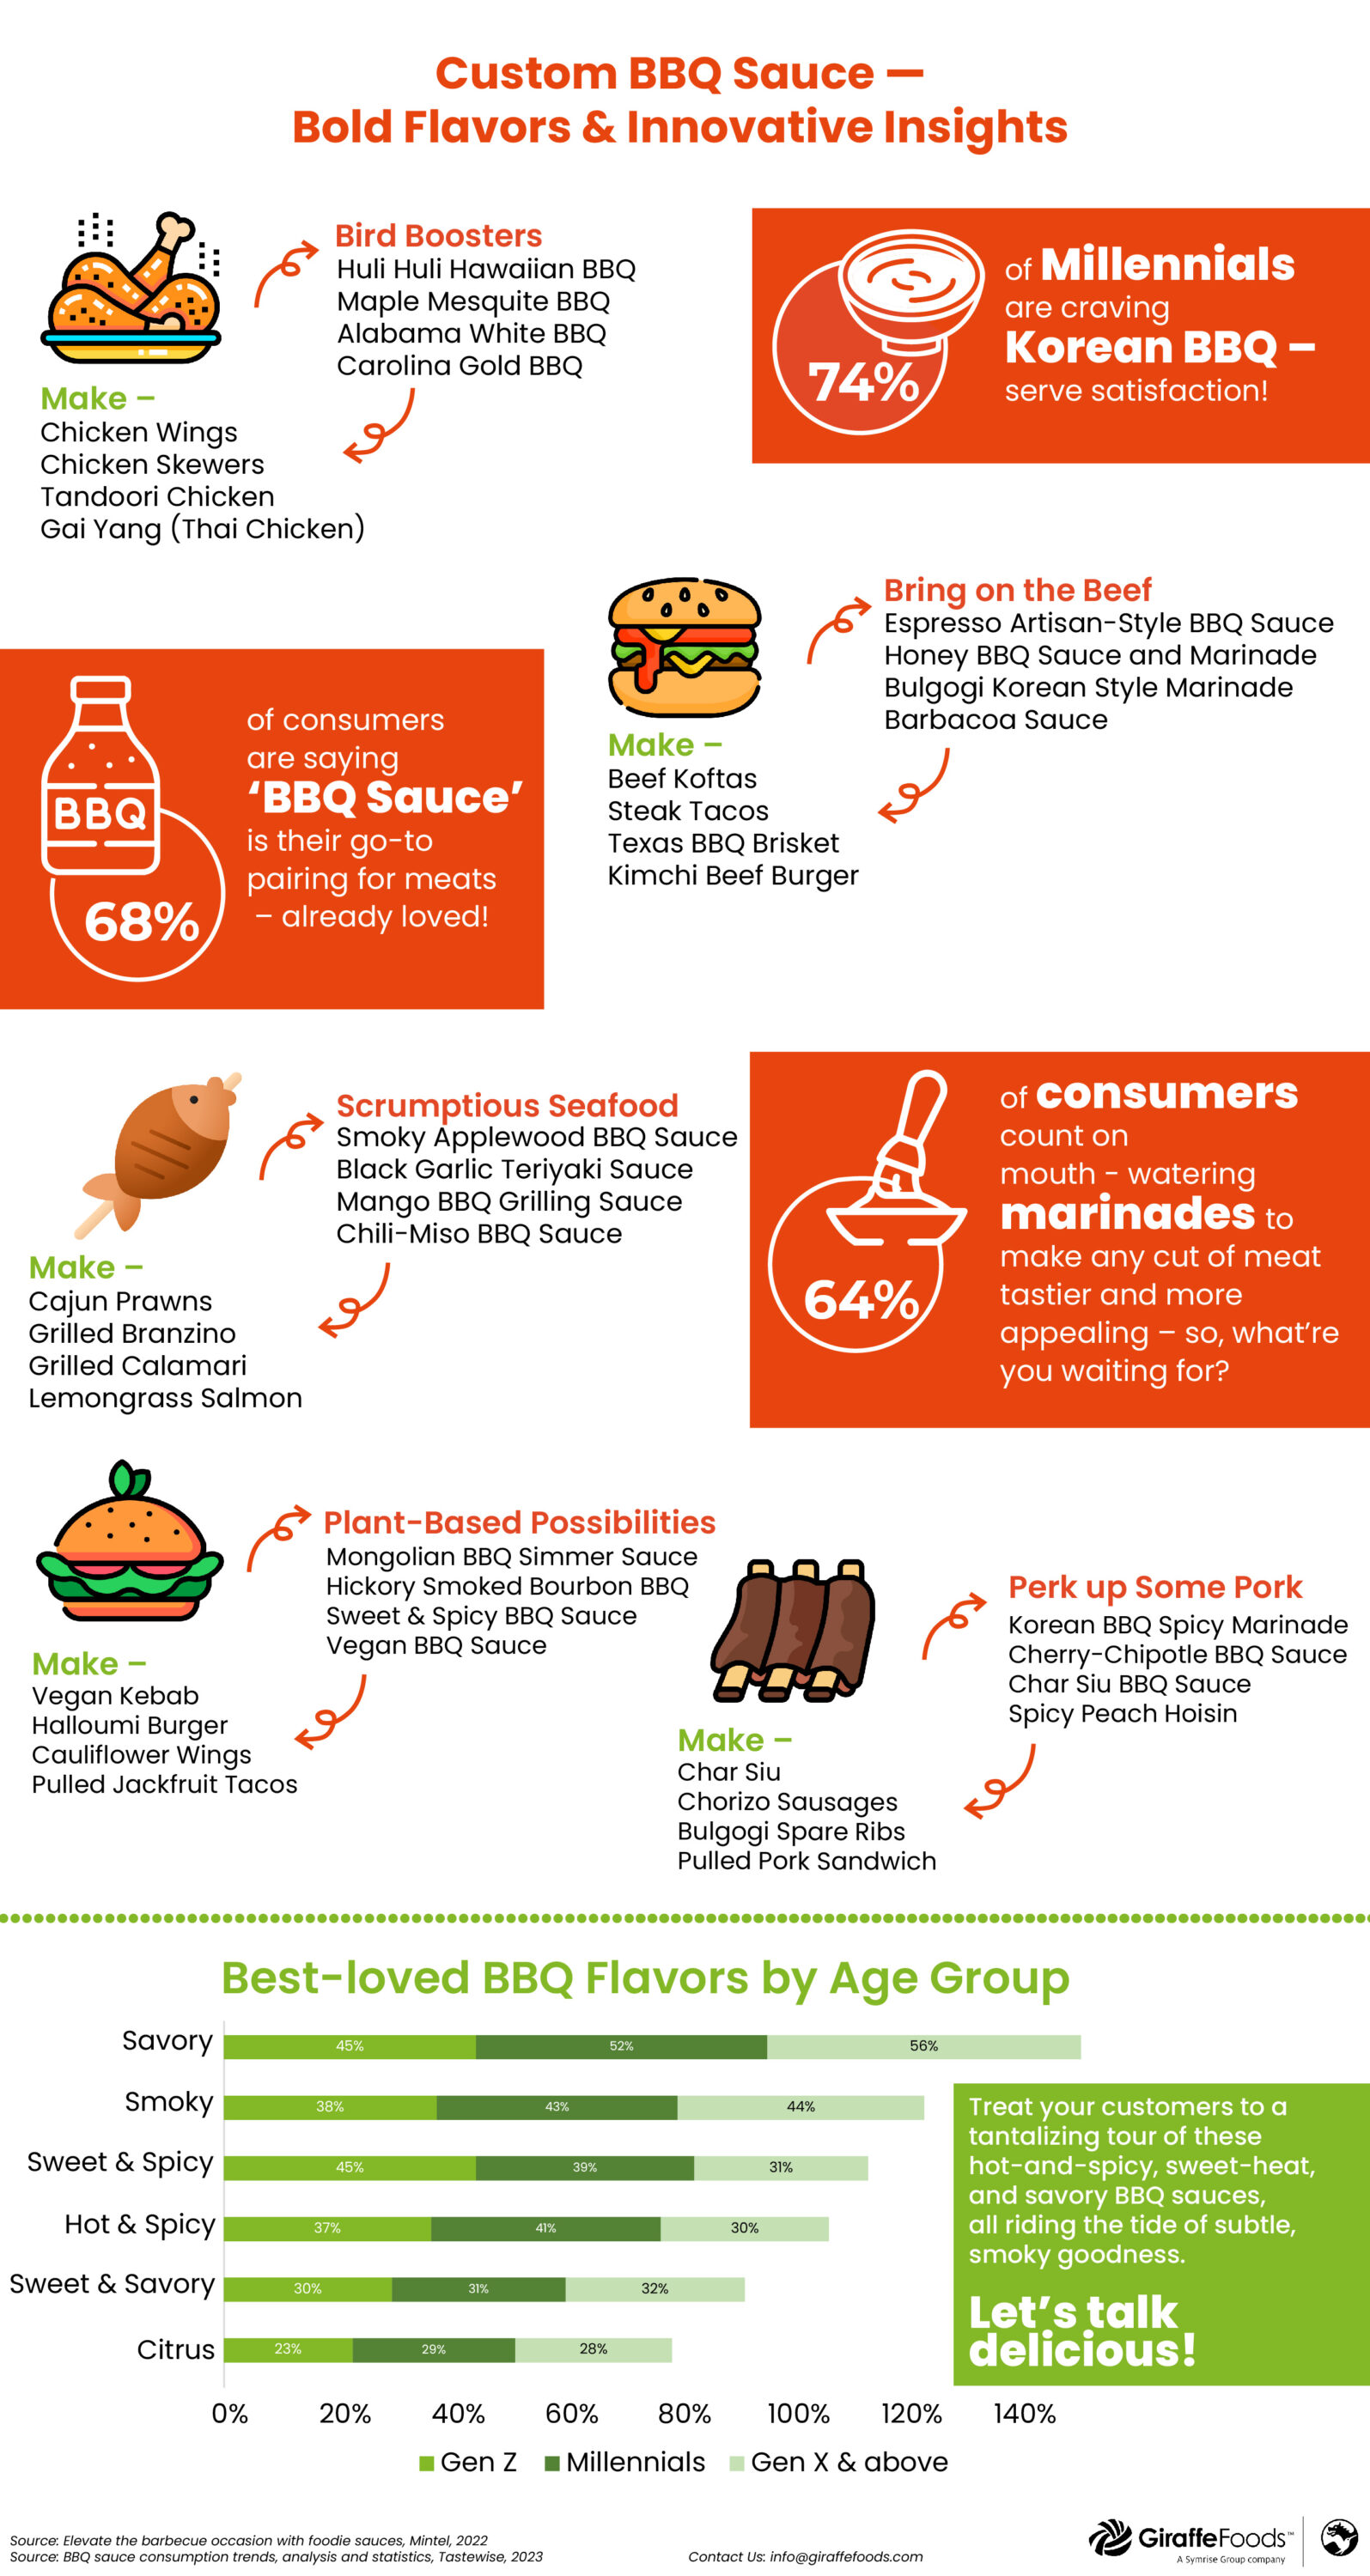 Custom BBQ Sauce infographic with insights and custom bbq sauces